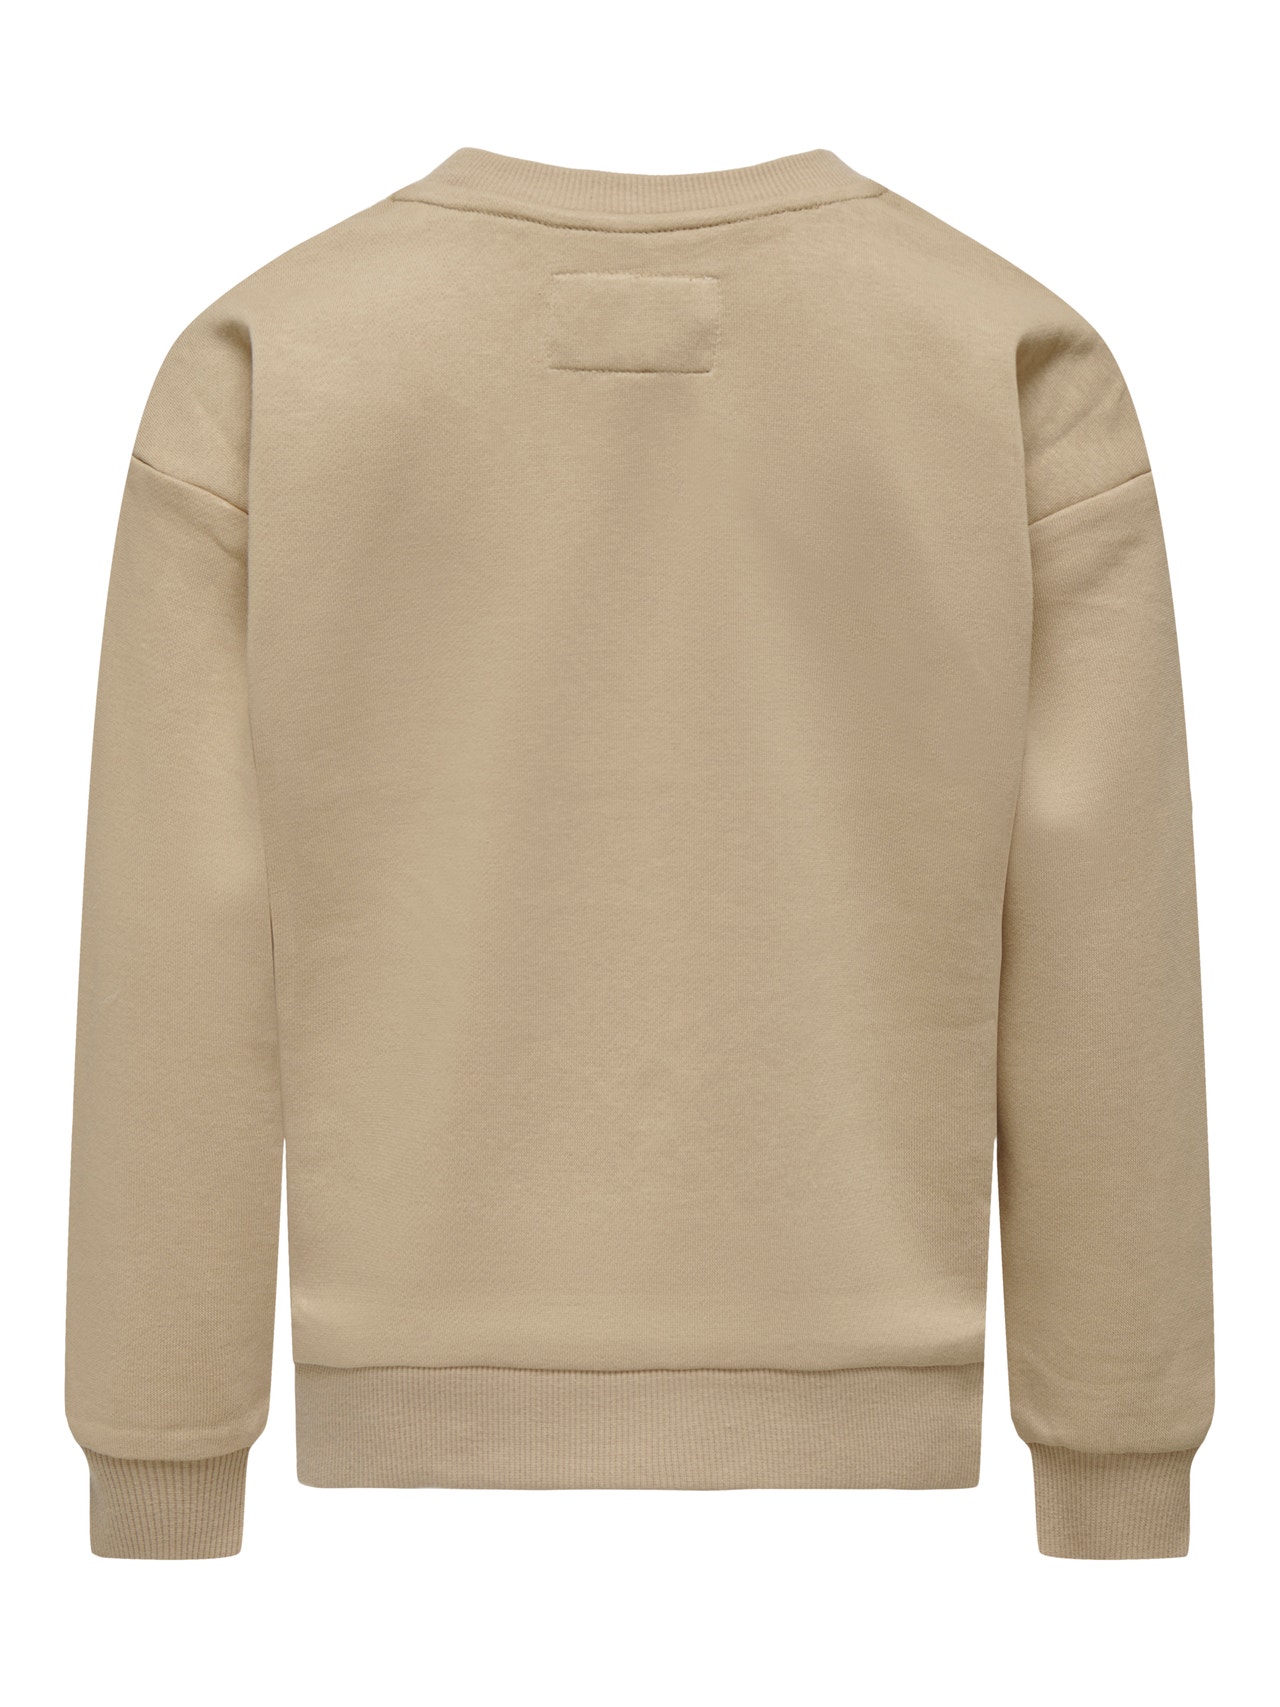 ONLY Loose Fit Round Neck Sweatshirts -Nomad - 15246734